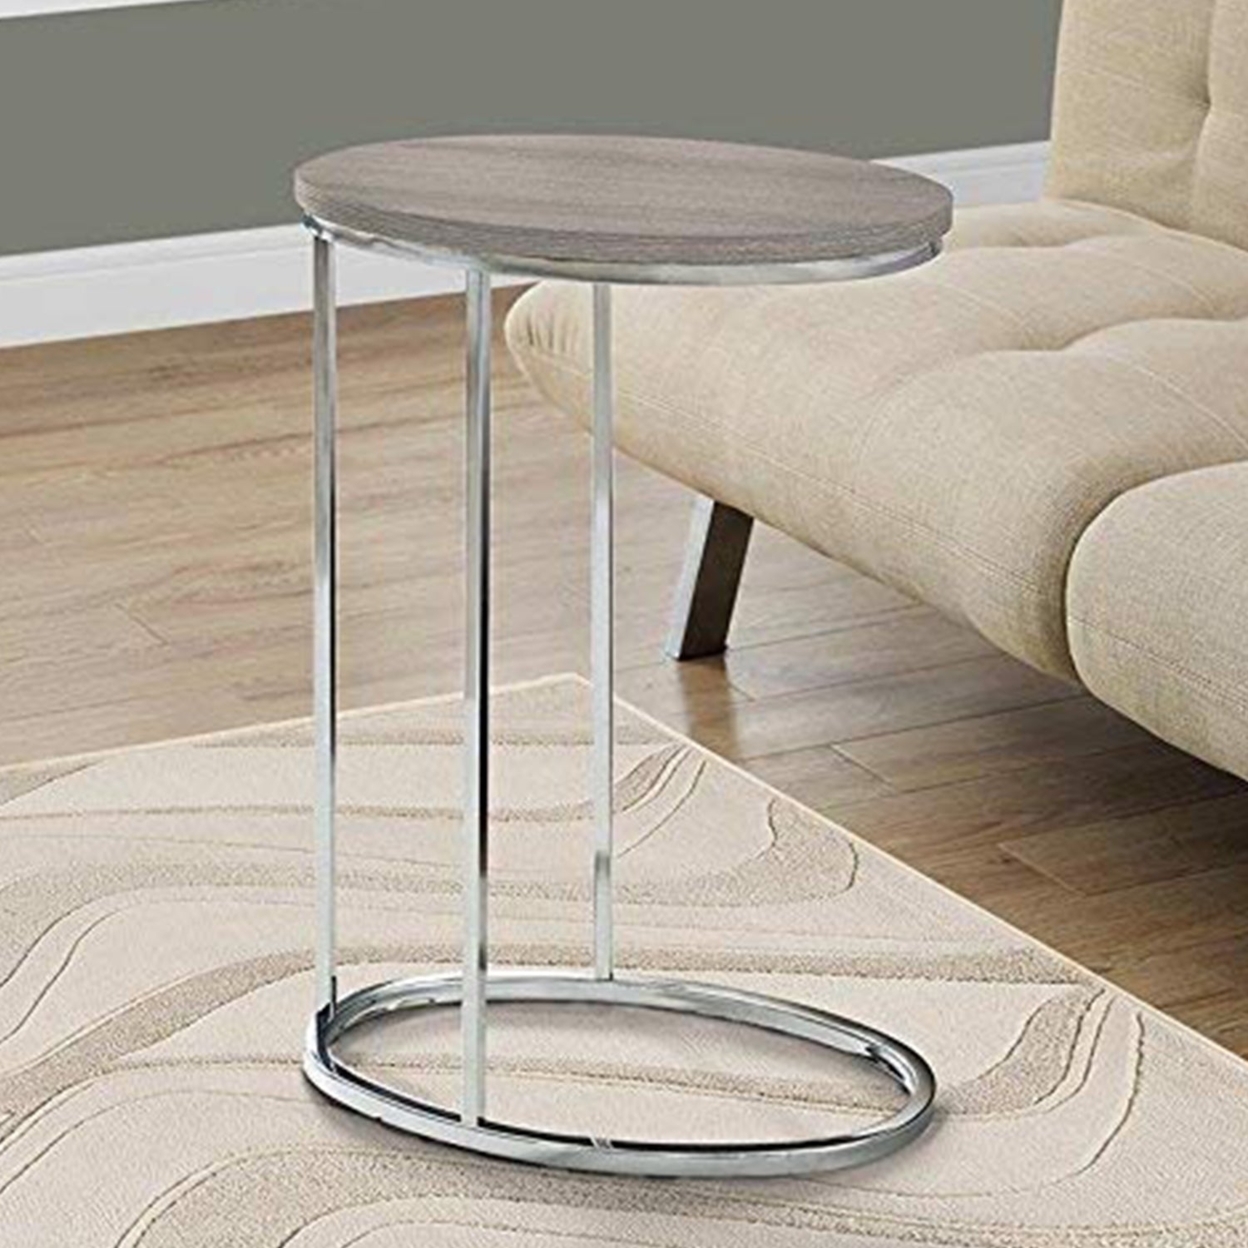 18.5" x 12" x 25" Dark Taupe Particle Board Laminate Metal Accent Table - Dark Taupe